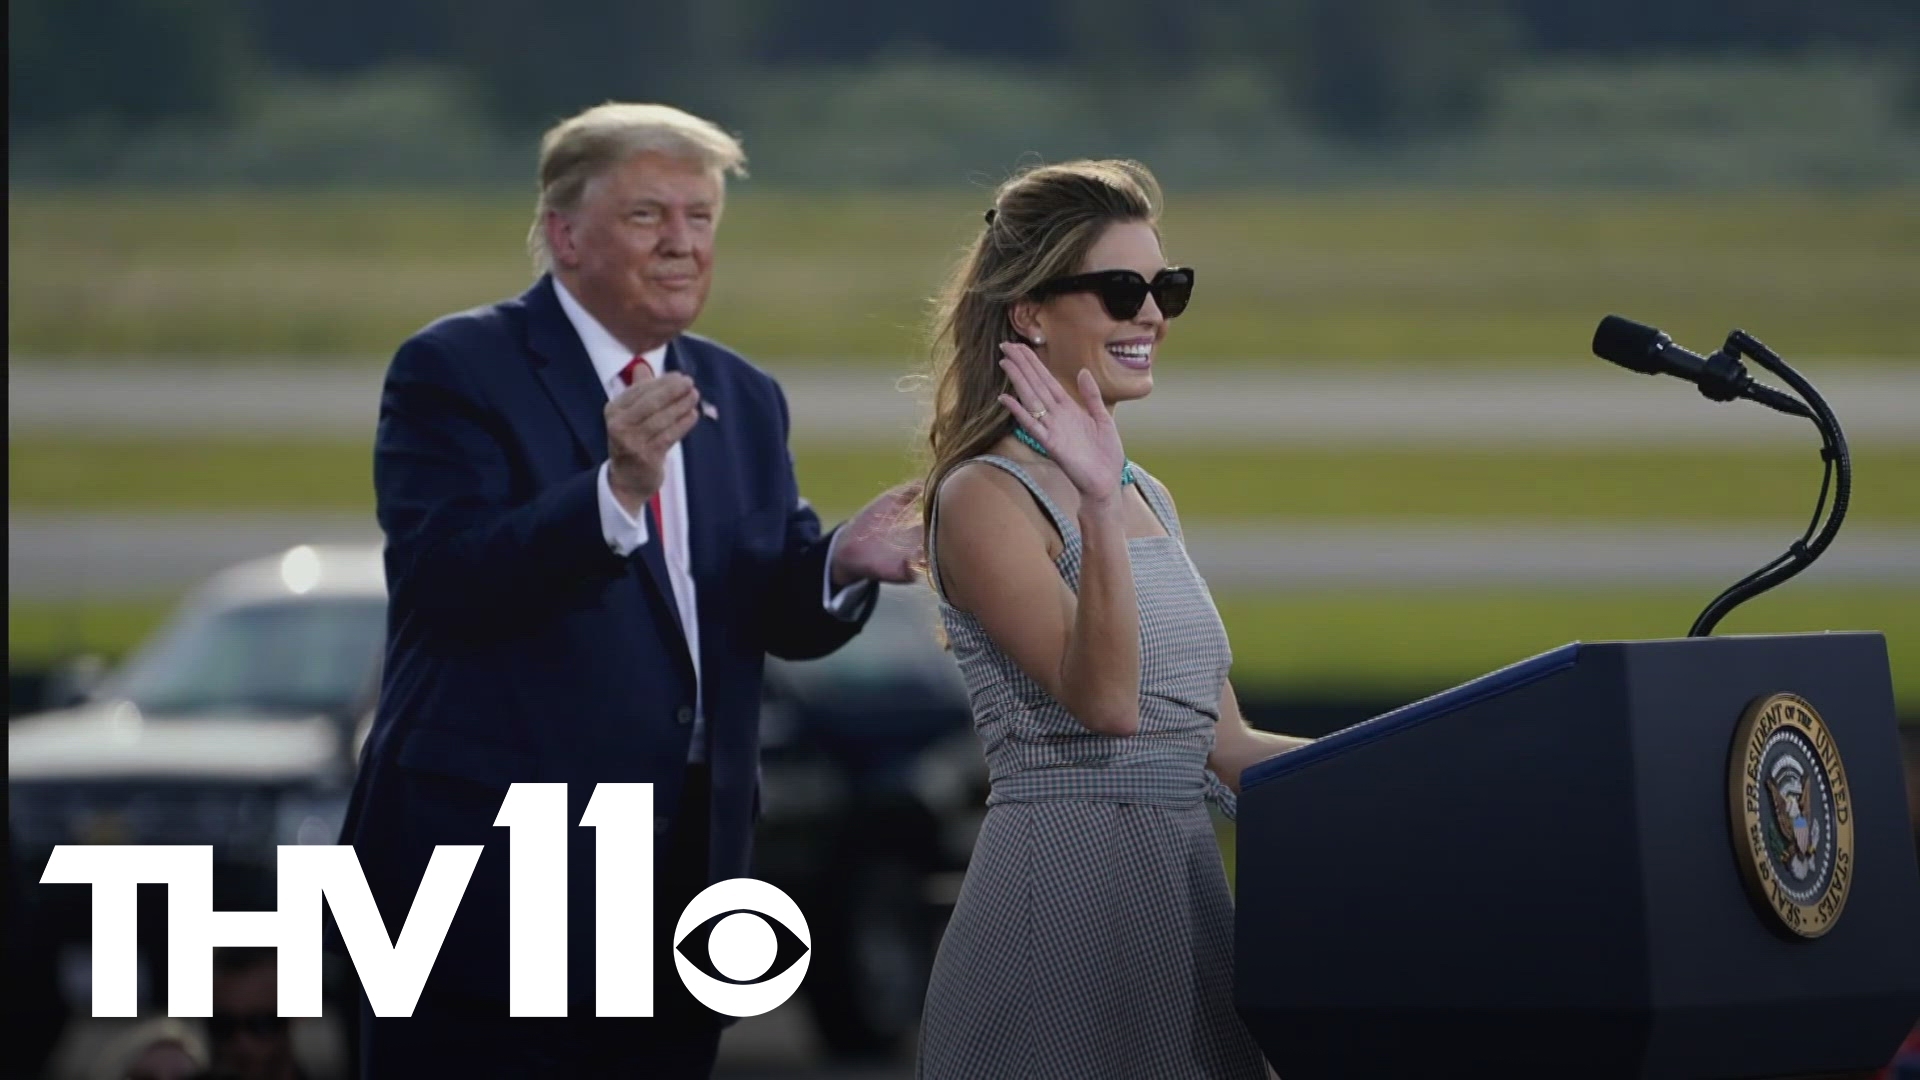 Donald Trump's 2016 campaign press secretary Hope Hicks testified on Friday in the former president's criminal hush money trial.